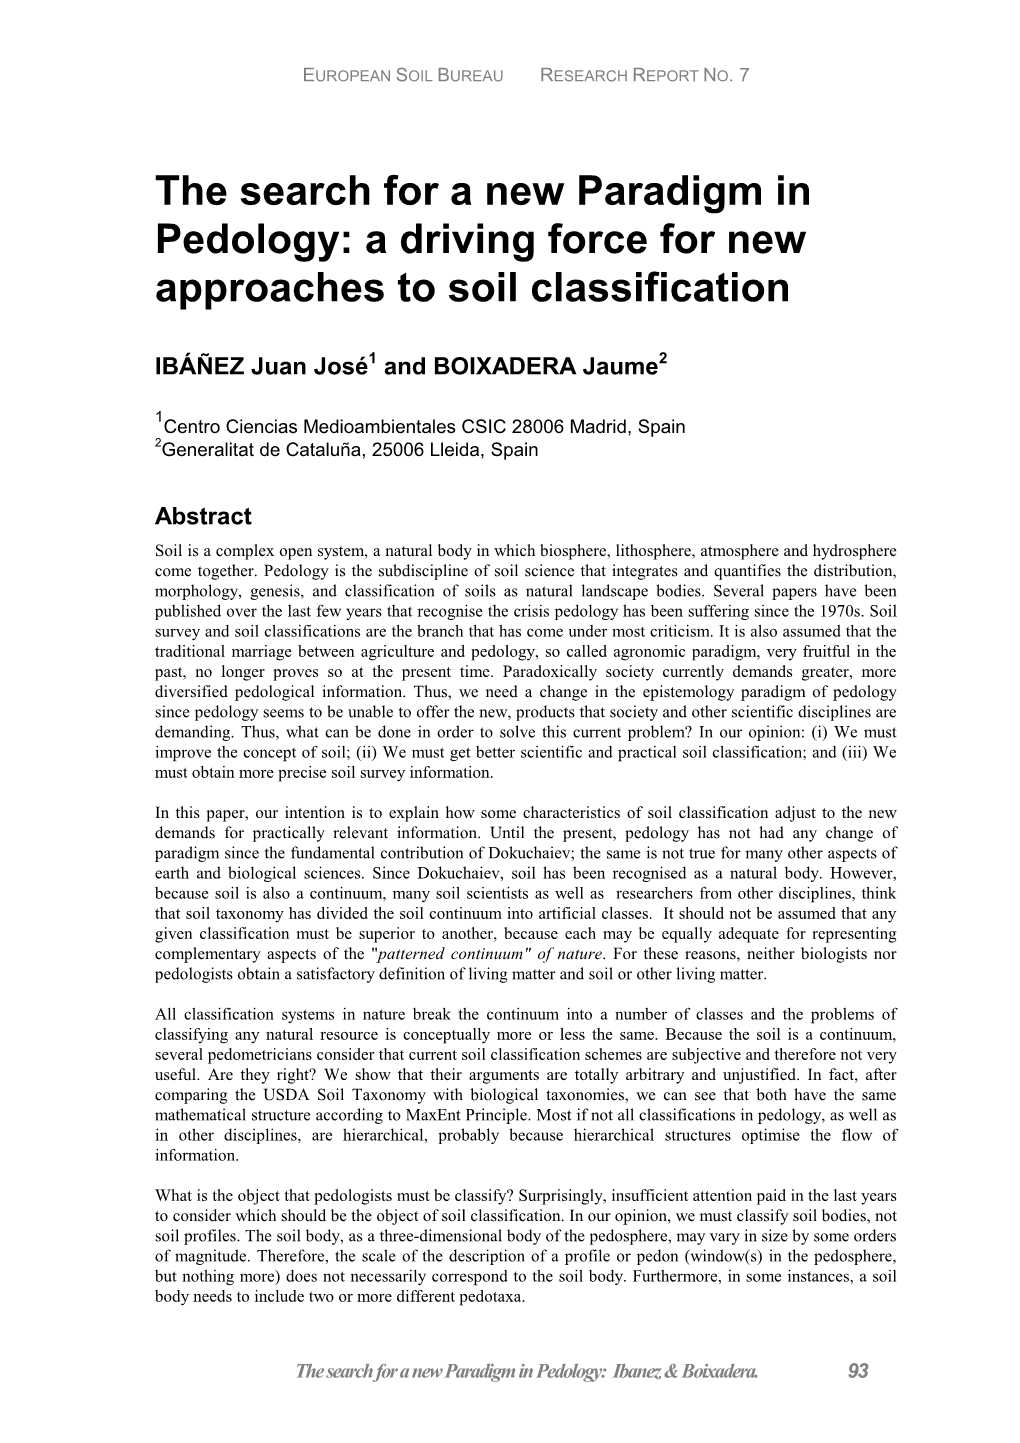 The Search for a New Paradigm in Pedology: a Driving Force for New Approaches to Soil Classification